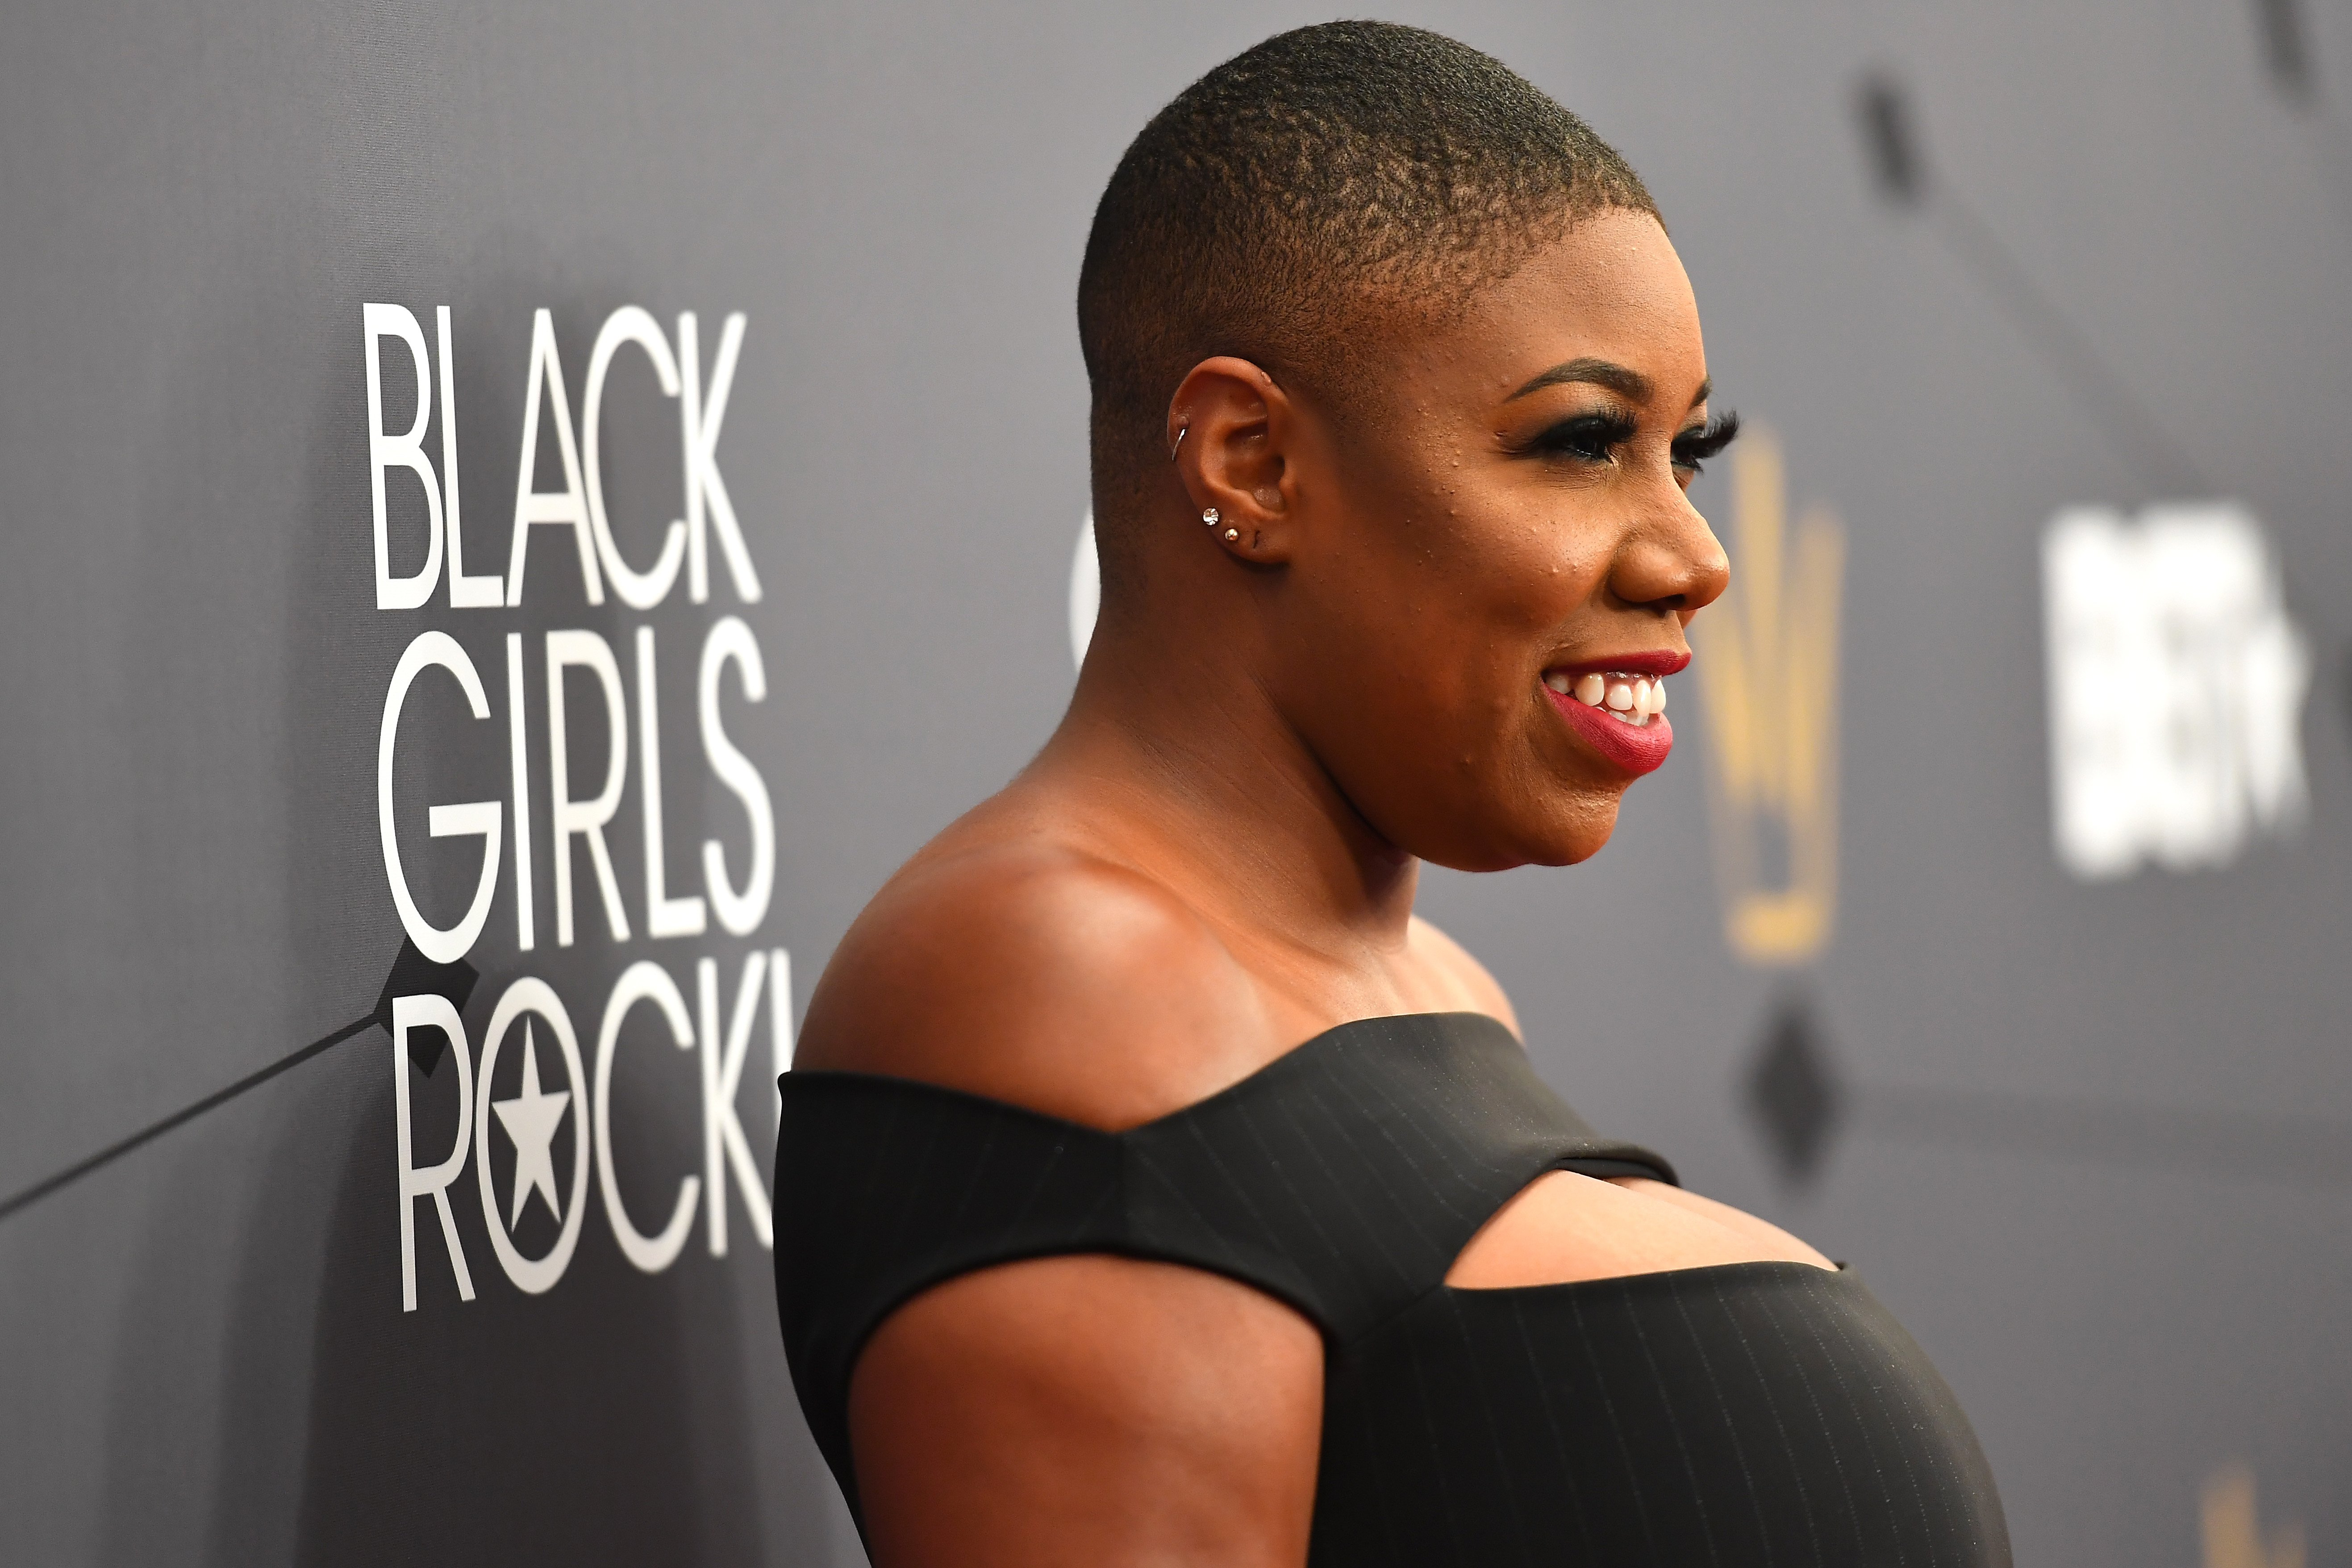 Symone Sanders attends the Black Girls Rock! 2018 Red Carpet at NJPAC on August 26, 2018 in Newark, New Jersey. (Photo by Paras Griffin/Getty Images for BET)